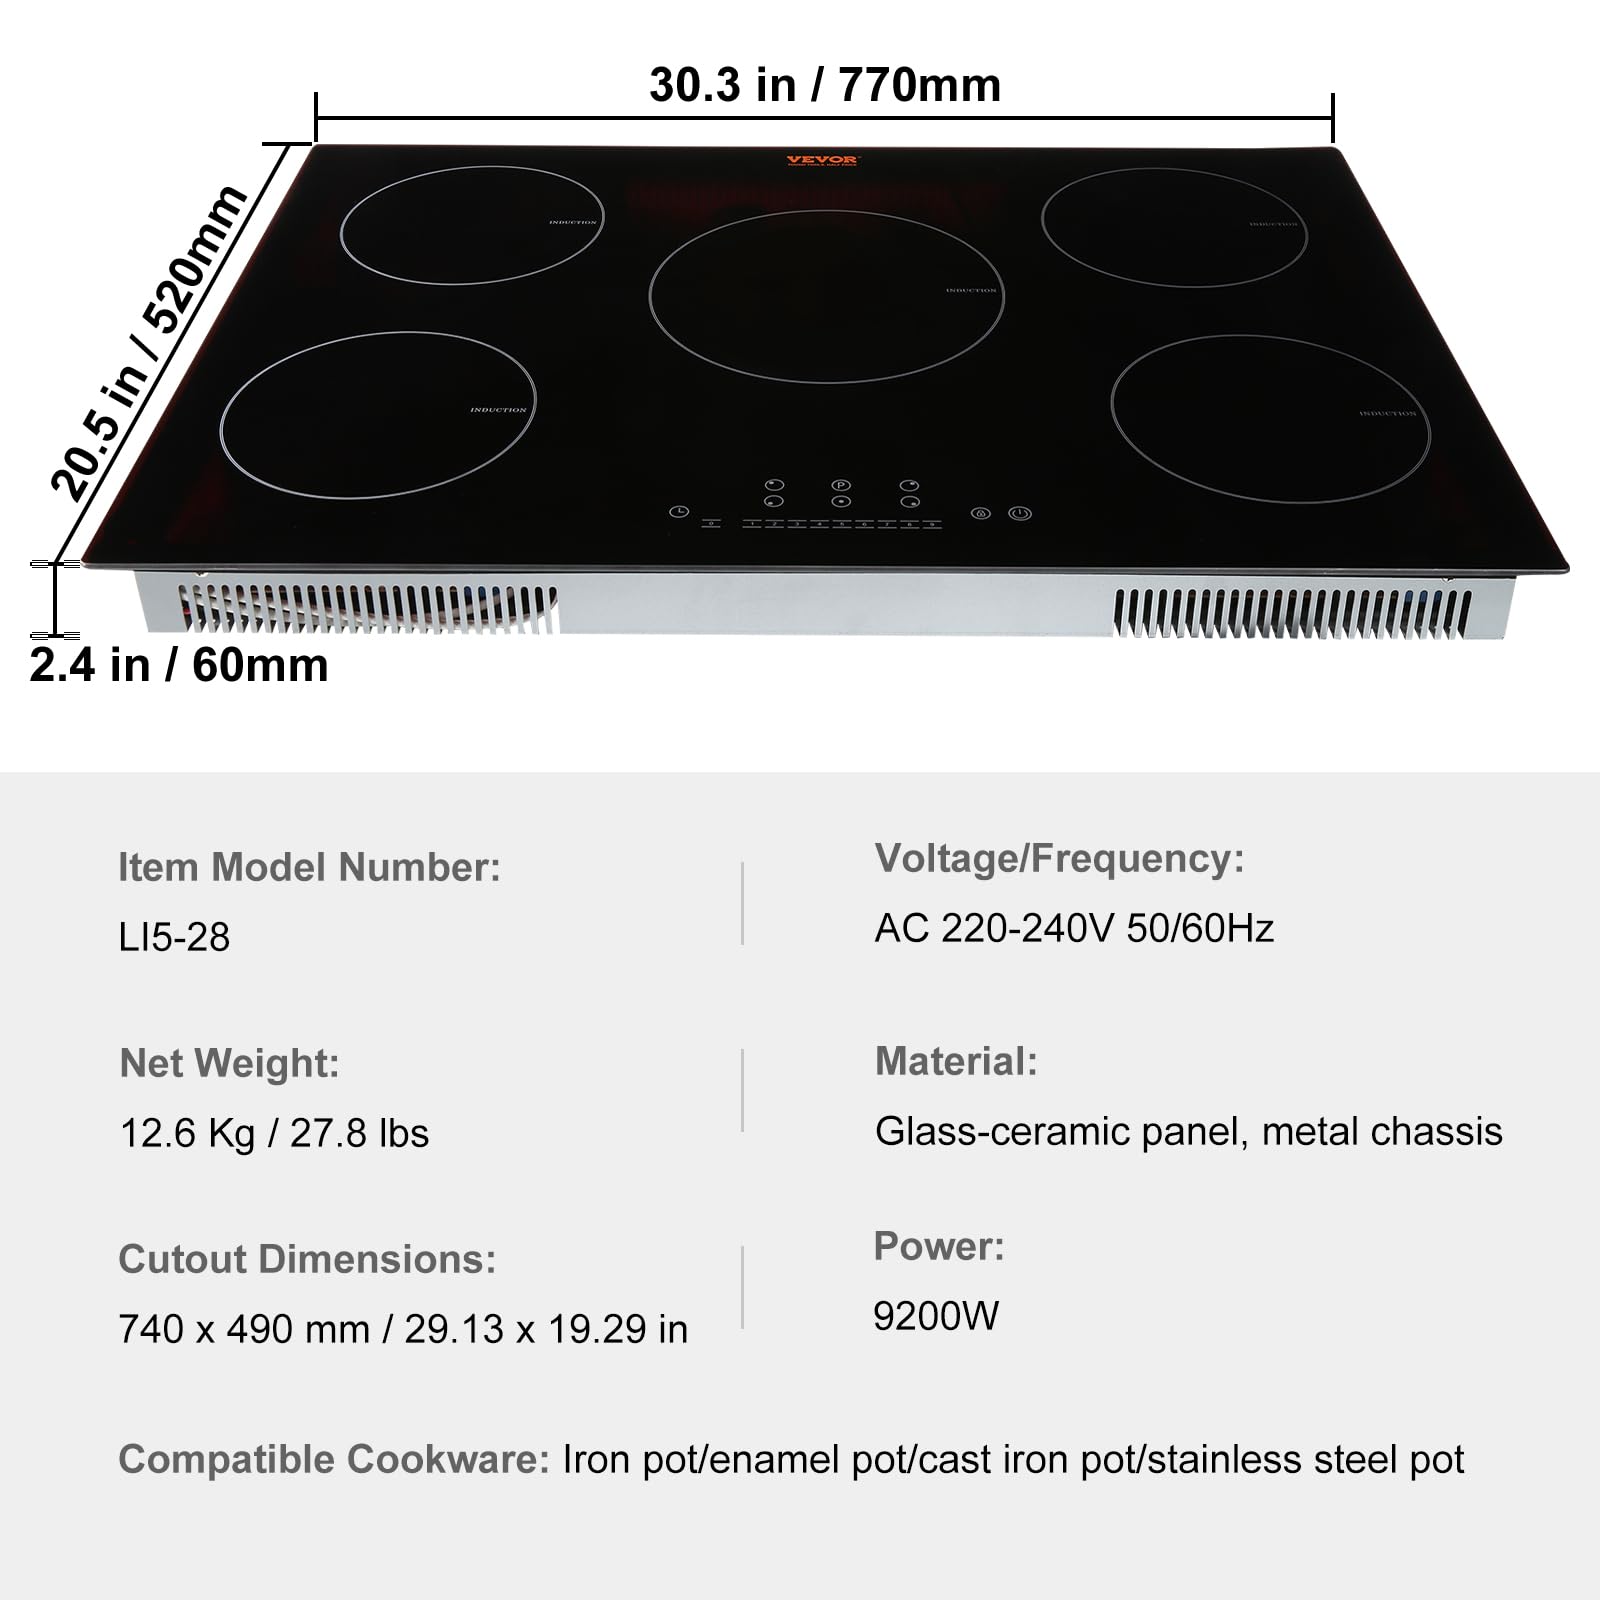 VEVOR Electric Cooktop, 5 Burners, 30'' Induction Stove Top, Built-in Magnetic Cooktop 9200W, 9 Heating Level Multifunctional Burner, LED Touch Screen w/Child Lock & Over-Temperature Protection